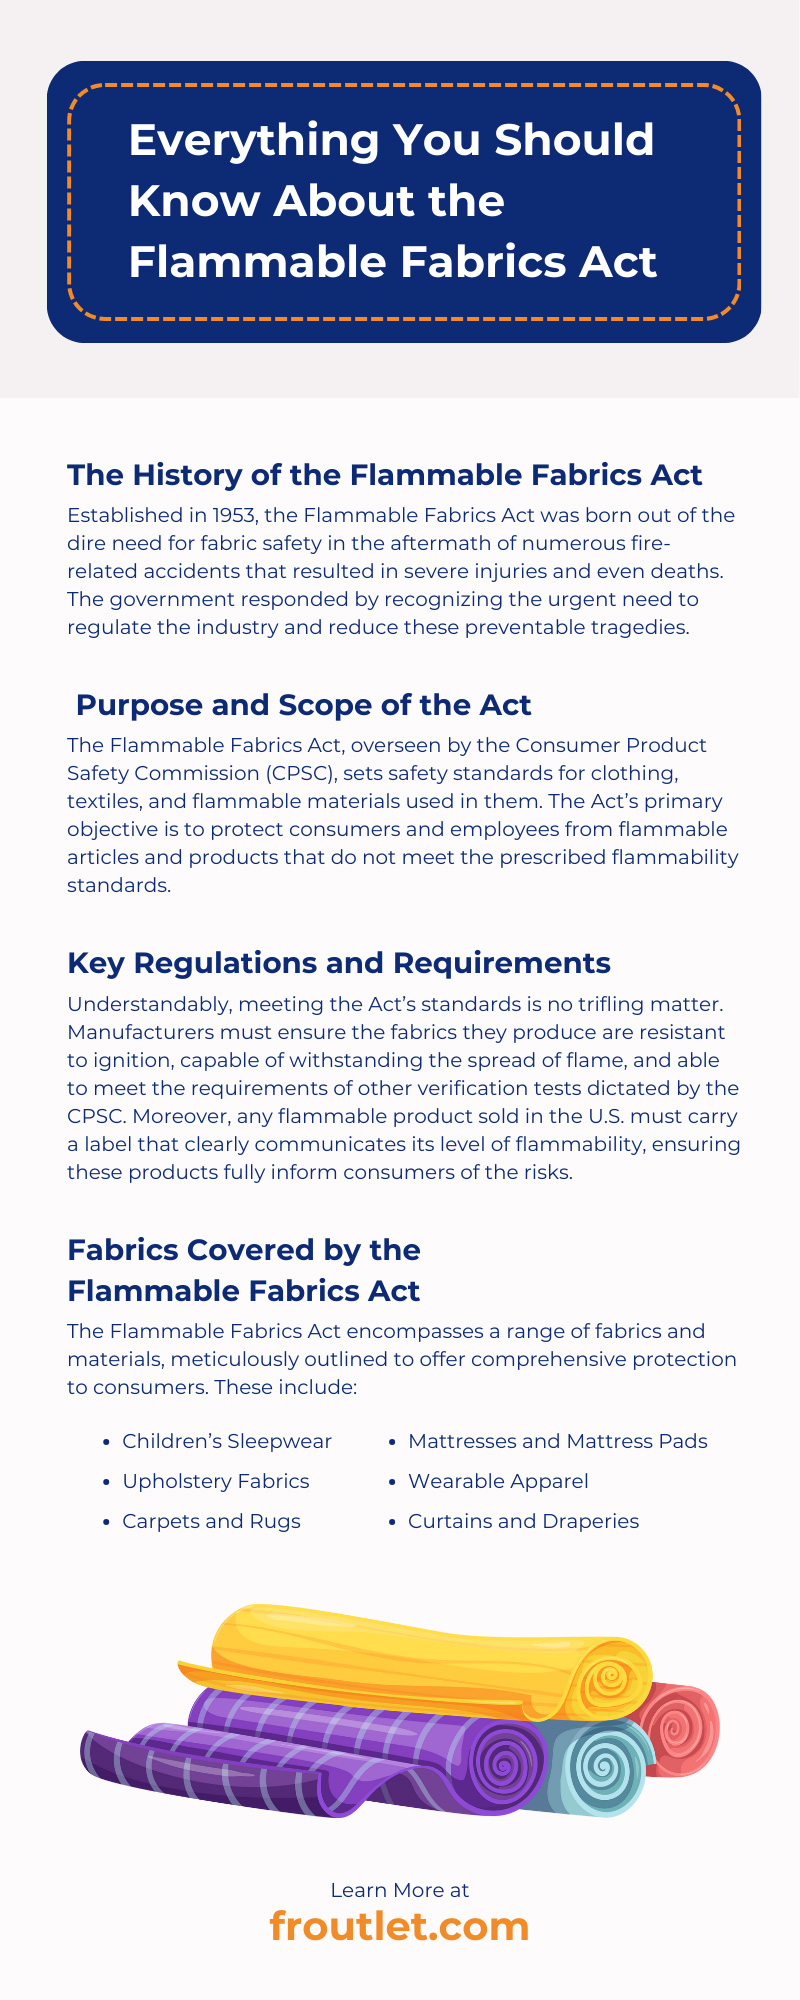 Everything You Should Know About the Flammable Fabrics Act